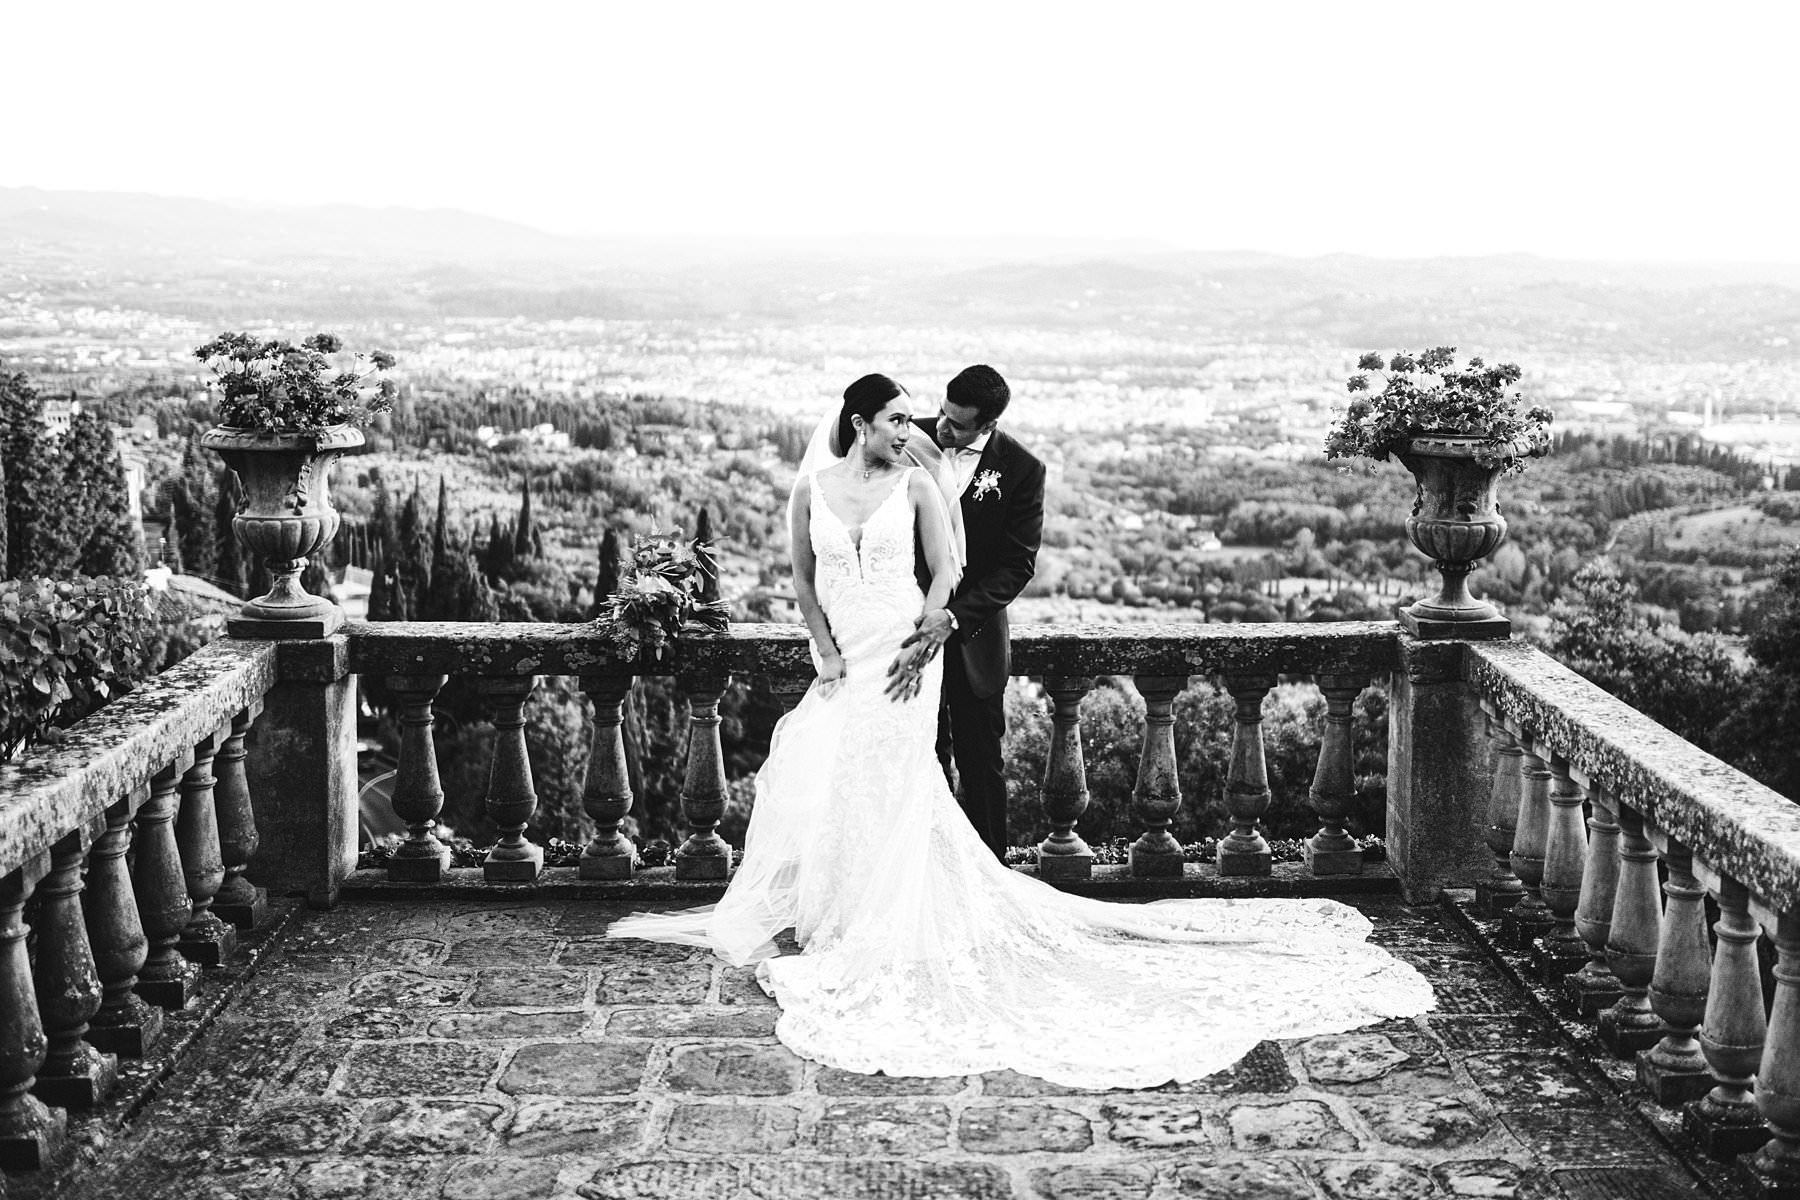 Graceful prewedding sunrise photos in Florence and intimate wedding in Italy at the incredible Belmond Villa San Michele. When you choose to have an intimate wedding in Italy, you might as well enjoy it at the fullest even before the big day itself. How? For example shooting dreamy sunrise photos to celebrate your engagement, and then saying “I do” in a breathtaking location right out of Florence. This is what Liza and Justin did. Bridal gown by Martina Liana